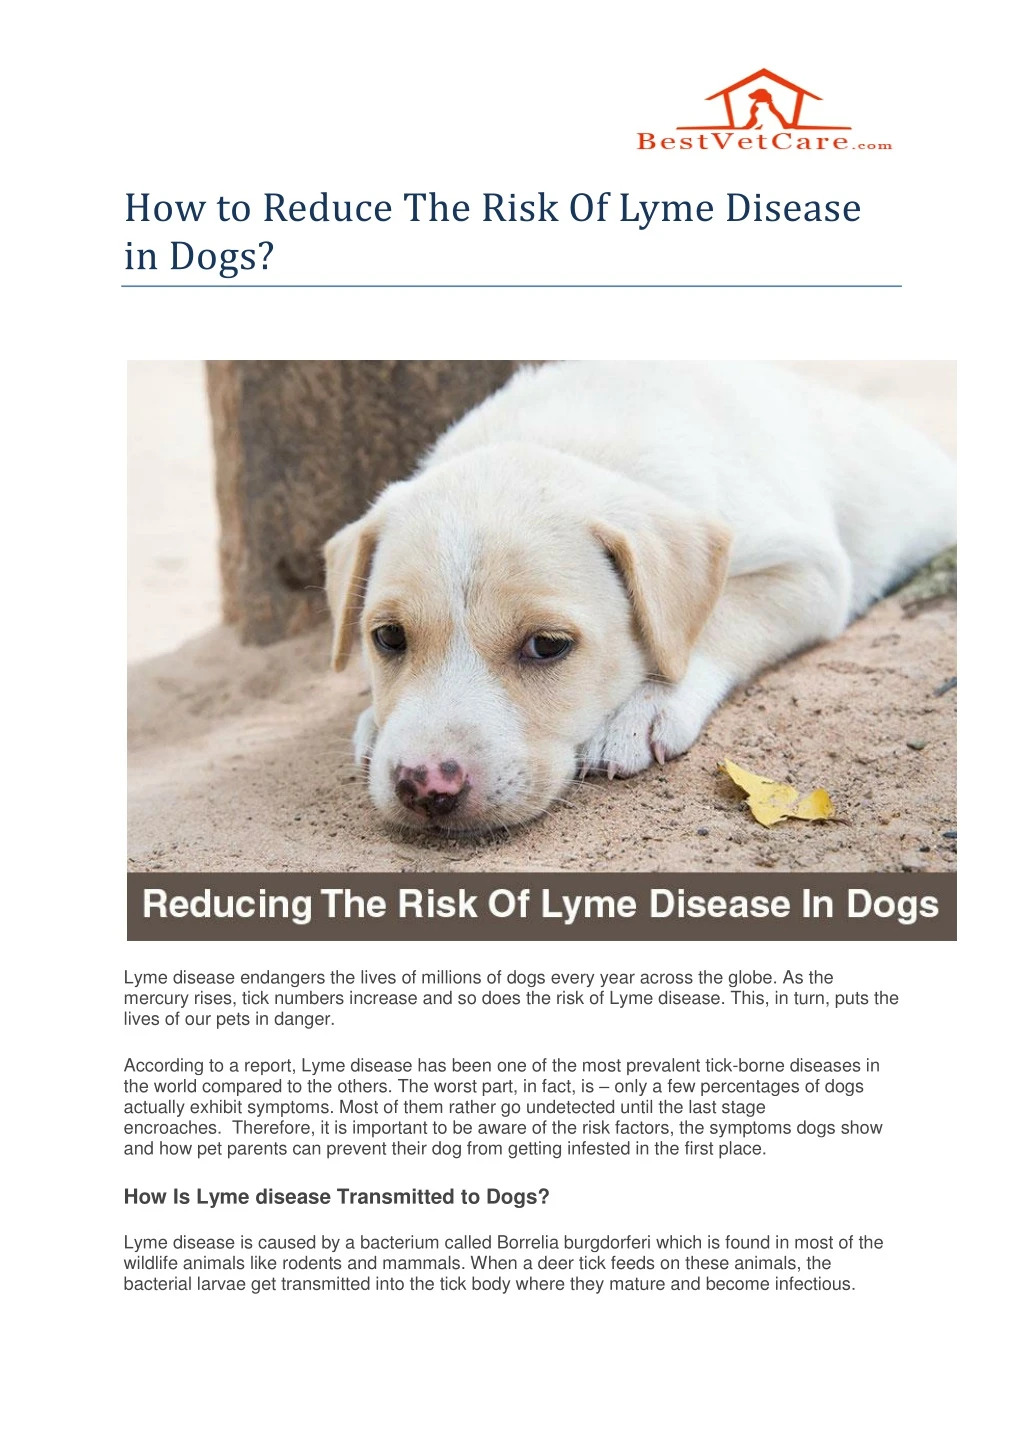 how to reduce the risk of lyme disease in dogs